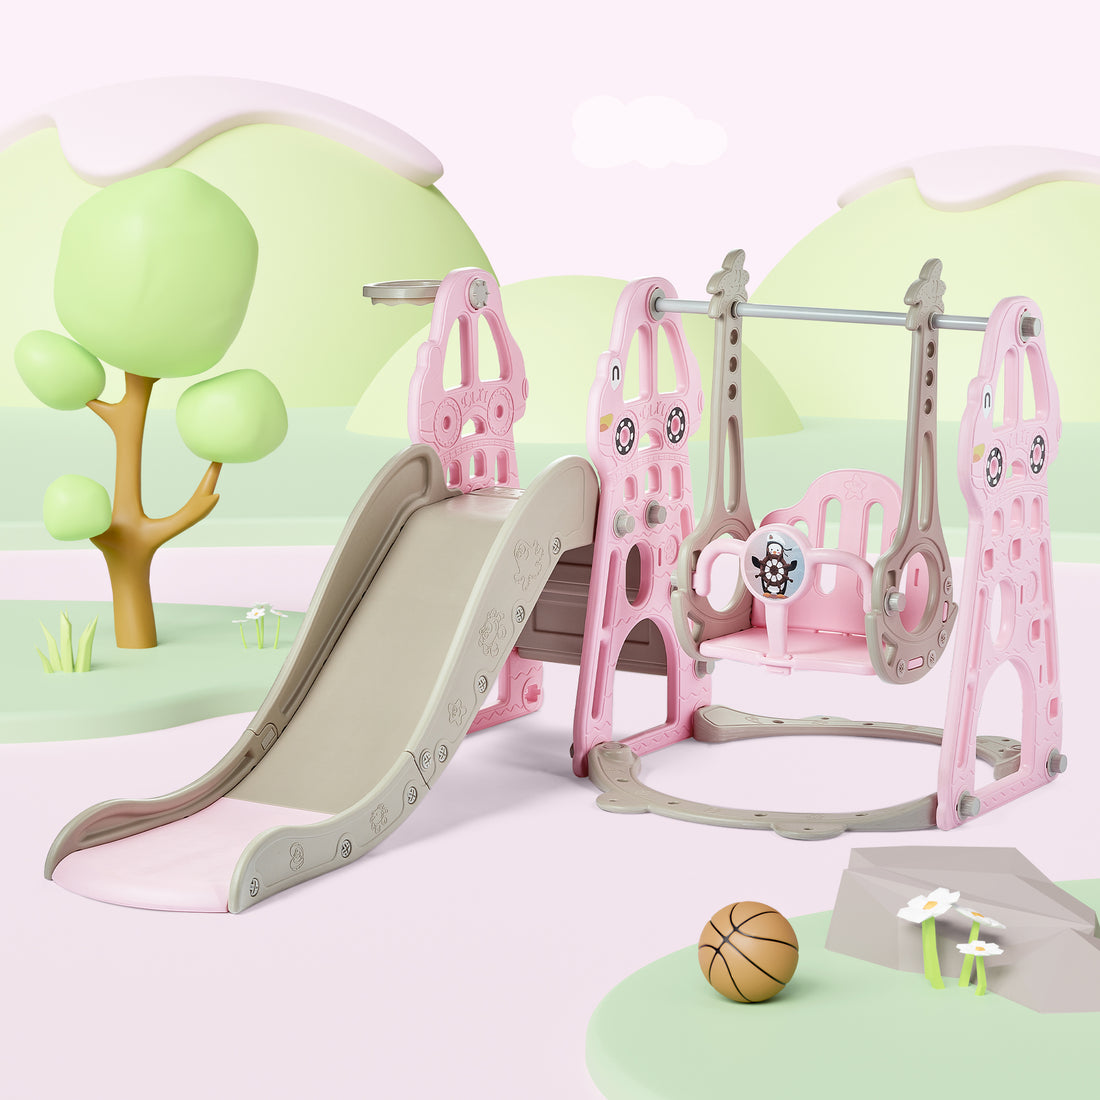 Duke Baby 4 in1 Swing and Slide Playset with Basketball Hoop - Pink